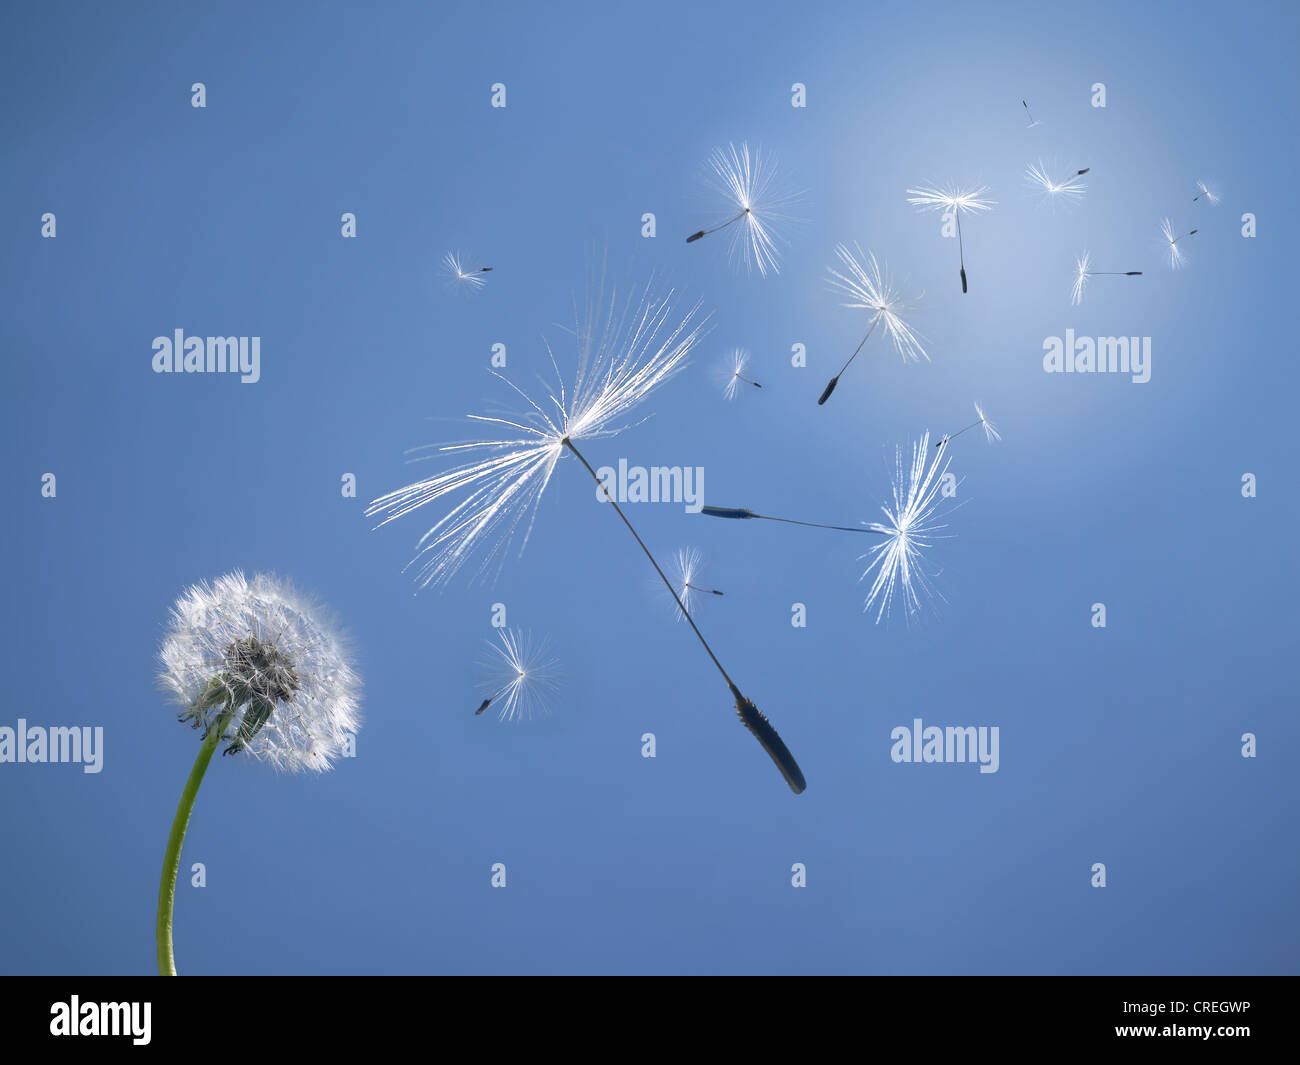 Dandelion Seeds Blowing In The Wind Stock Photo